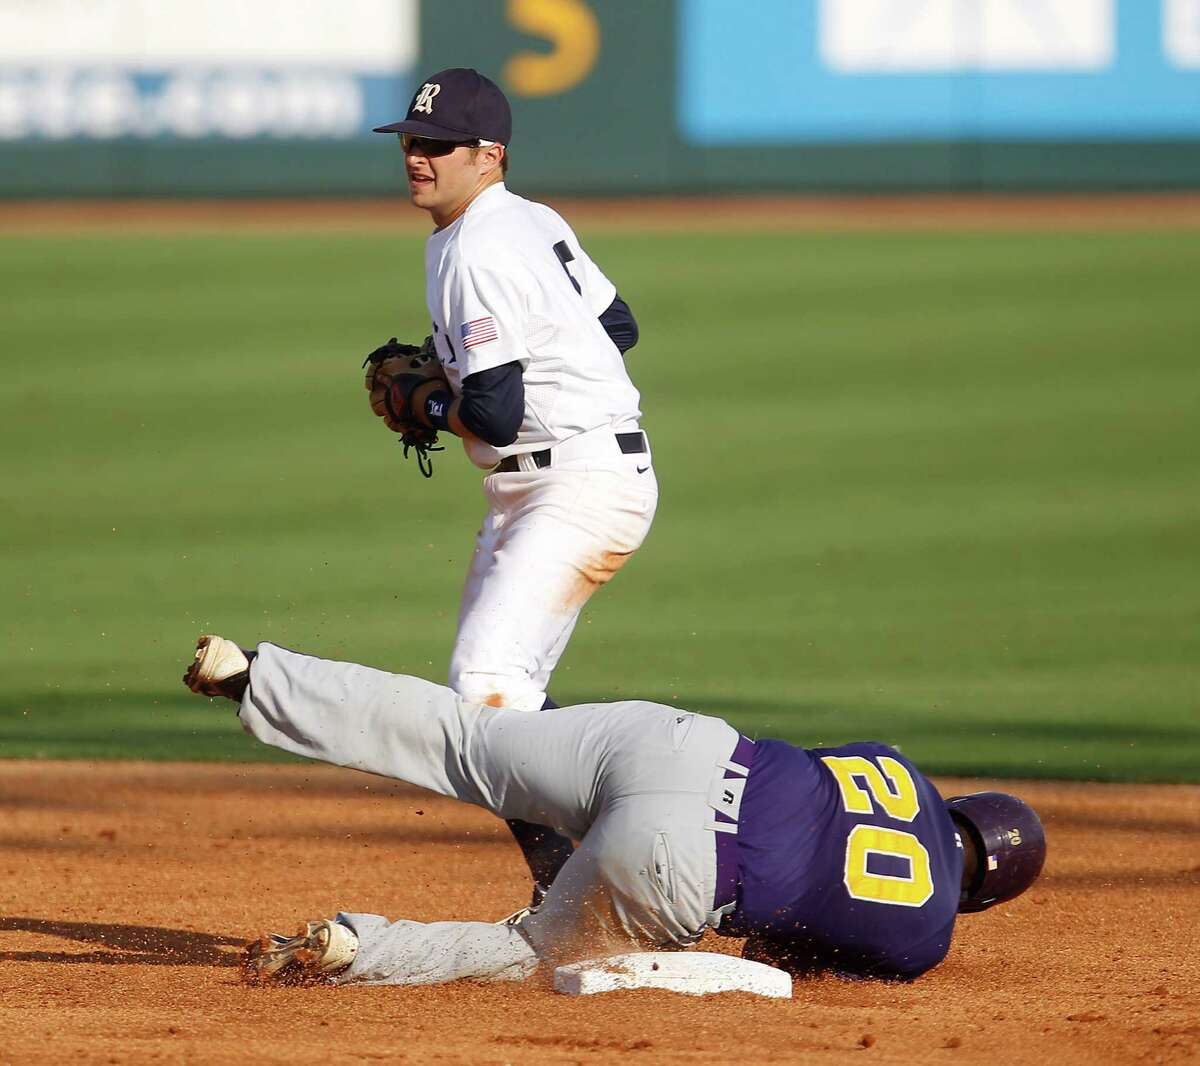 Prairie View's Evan Richard (20) lies on second base safely after a throwing error as Rice's Christian Stringer (5) tries to tag him in the 2nd inning during a college baseball game at the Houston Regional at Rice University, Friday, June 1, 2012, in Houston. Rice won the game 3-2.